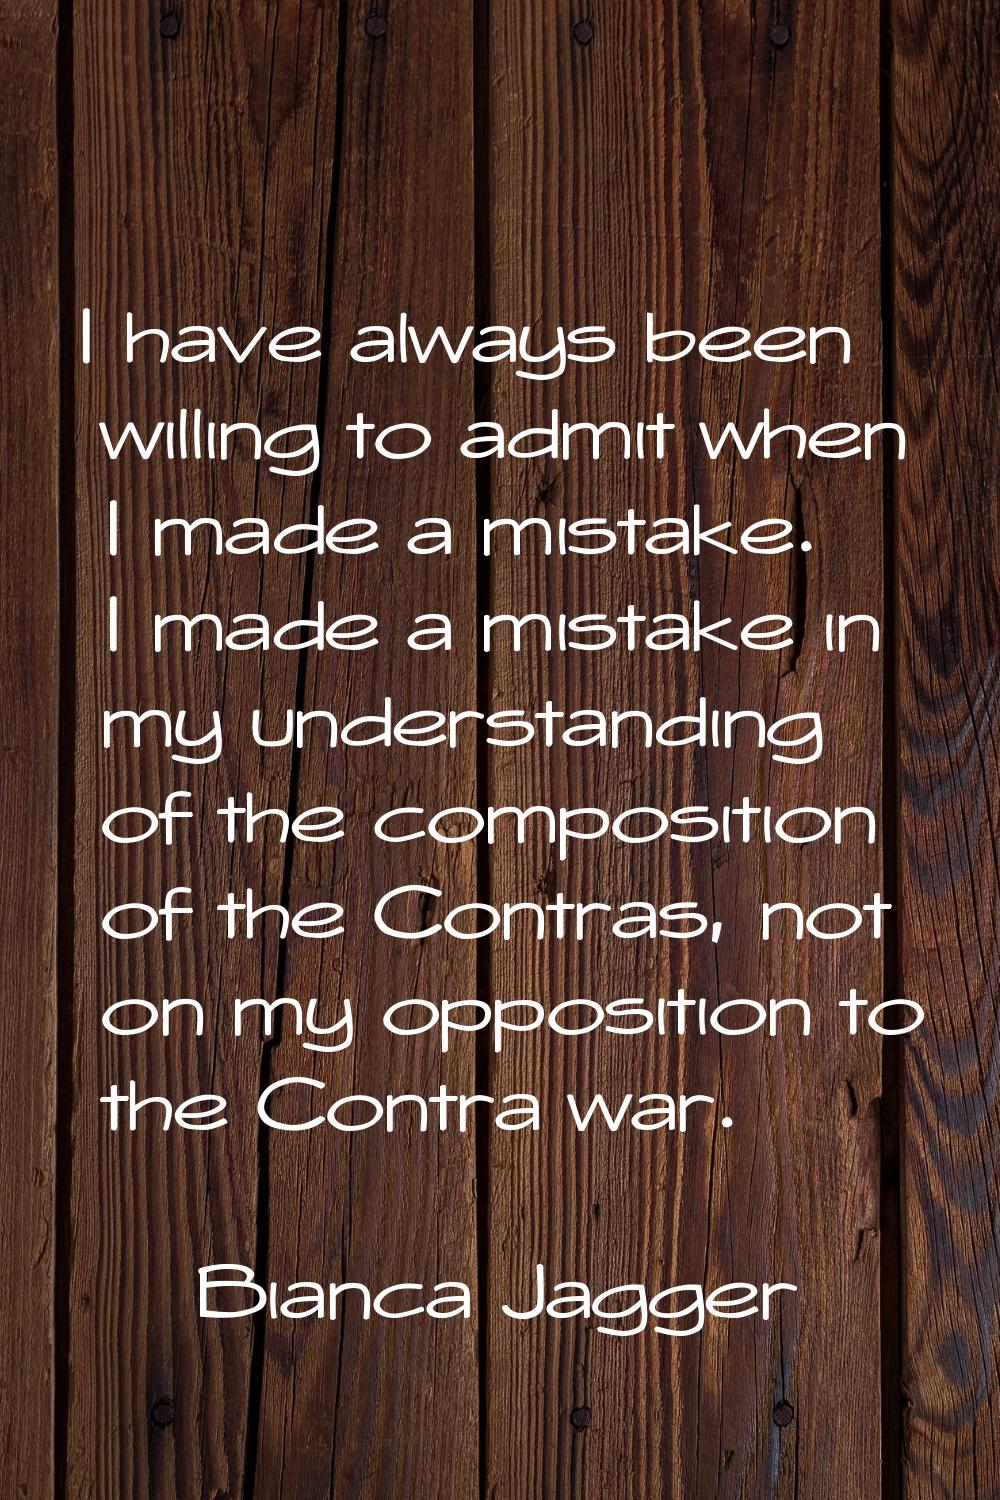 I have always been willing to admit when I made a mistake. I made a mistake in my understanding of 